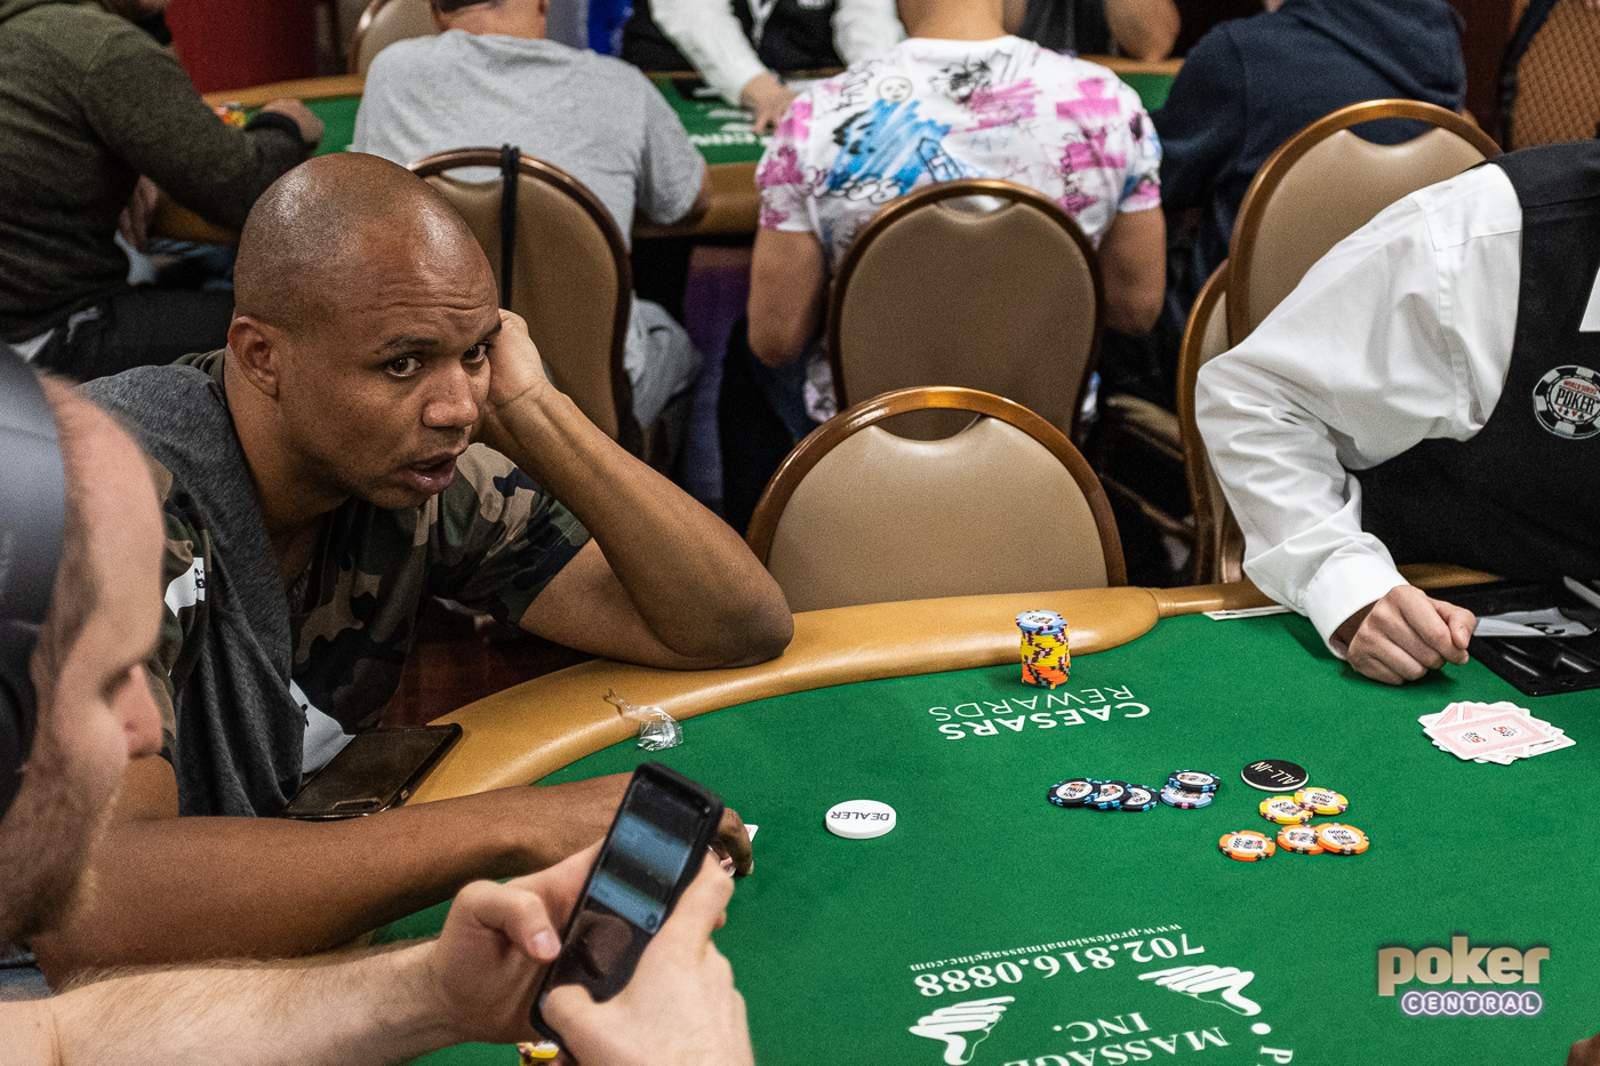 Phil Ivey Lasts 51 Minutes in 2019 WSOP Main Event